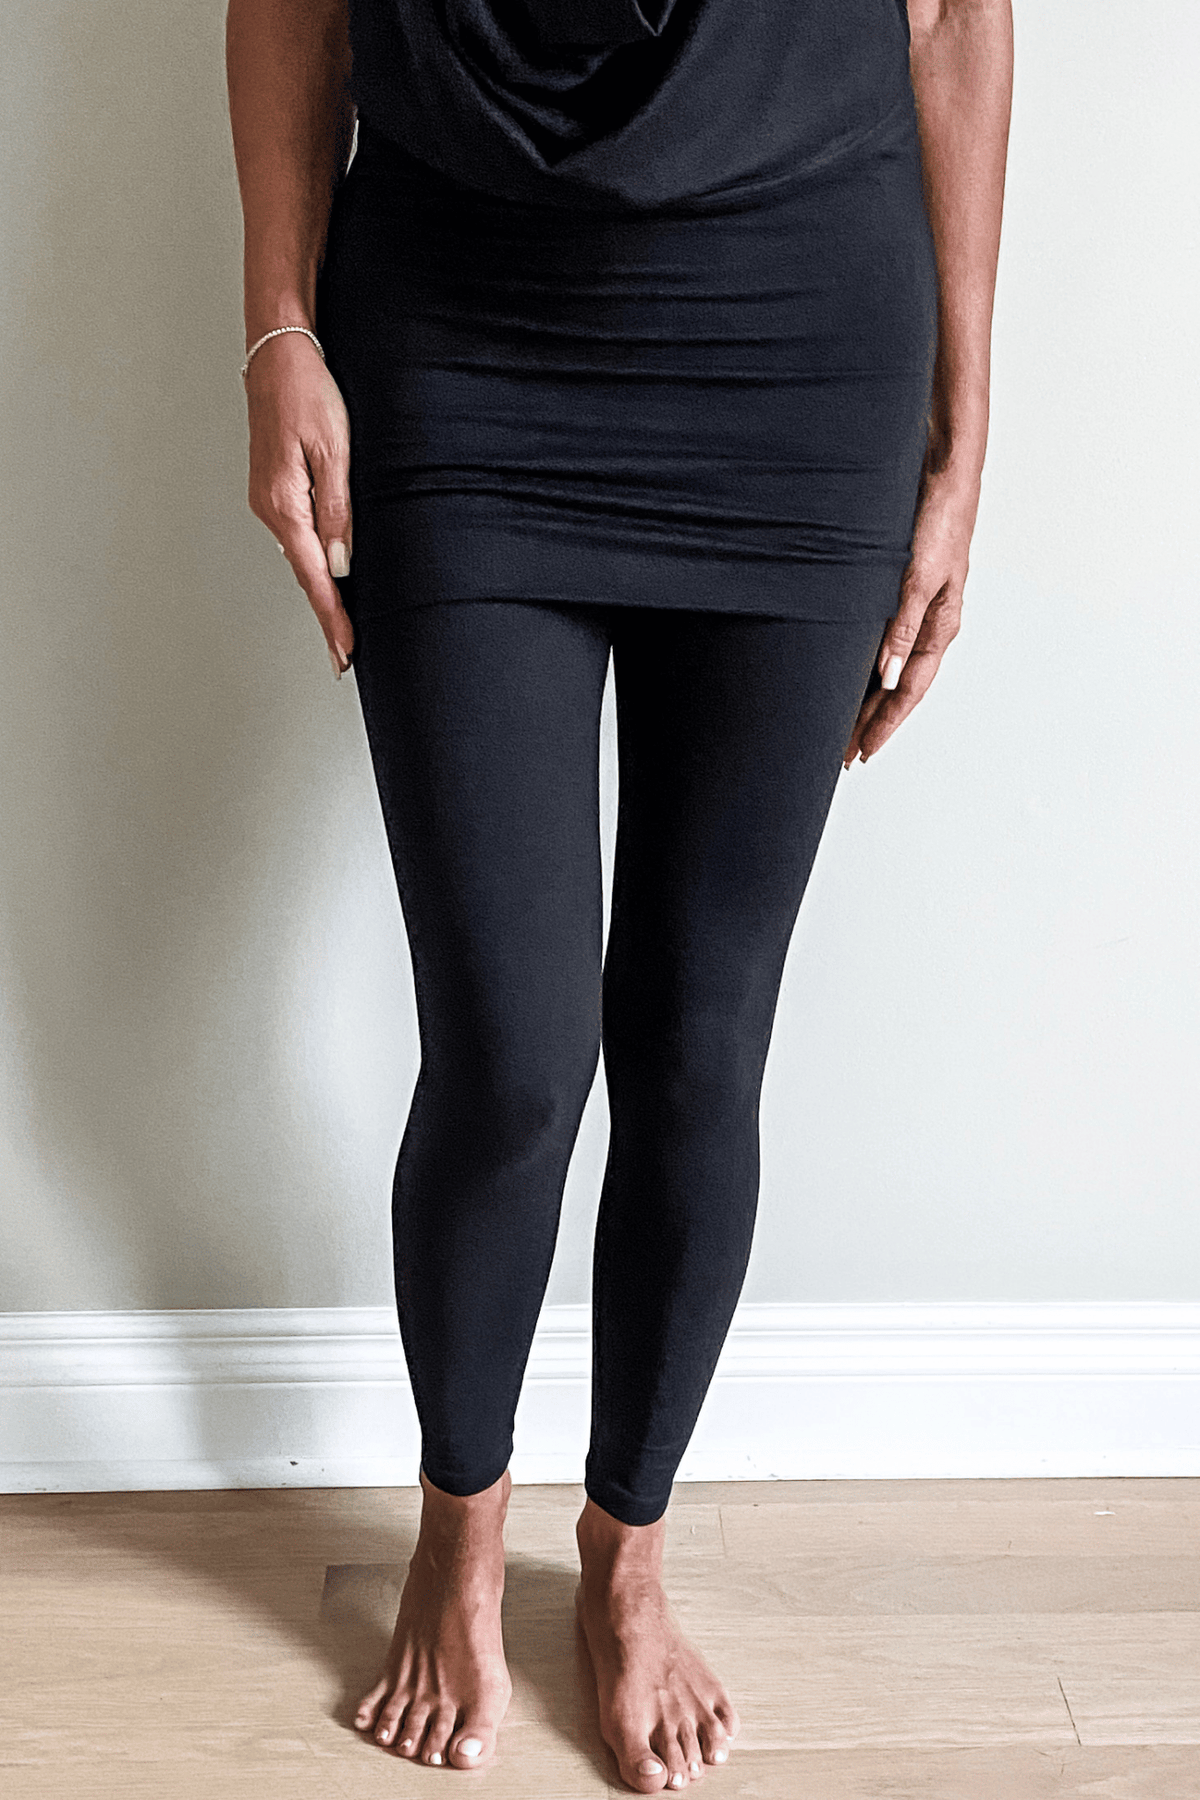 Travel Tights in Black Brushed Fall 2023 Collection from Diane Kroe